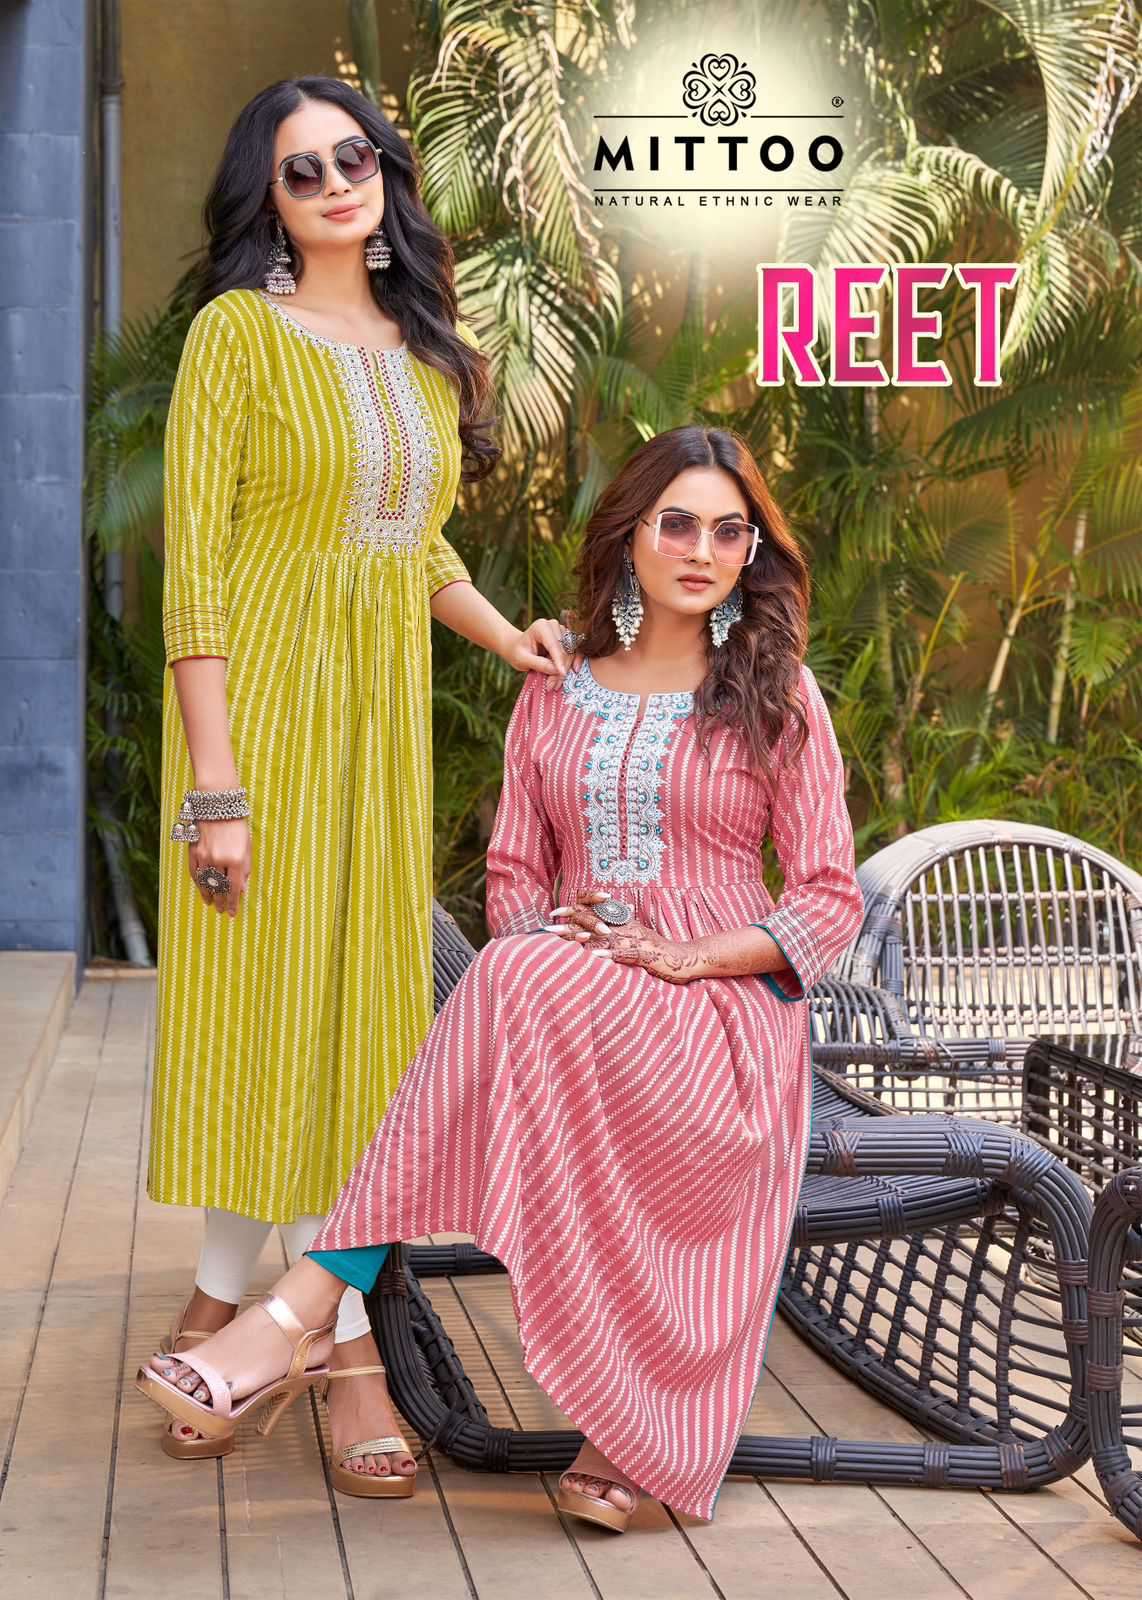 Mittoo Reet Fancy Rayon Kurti Designs New Collection Online Dealers